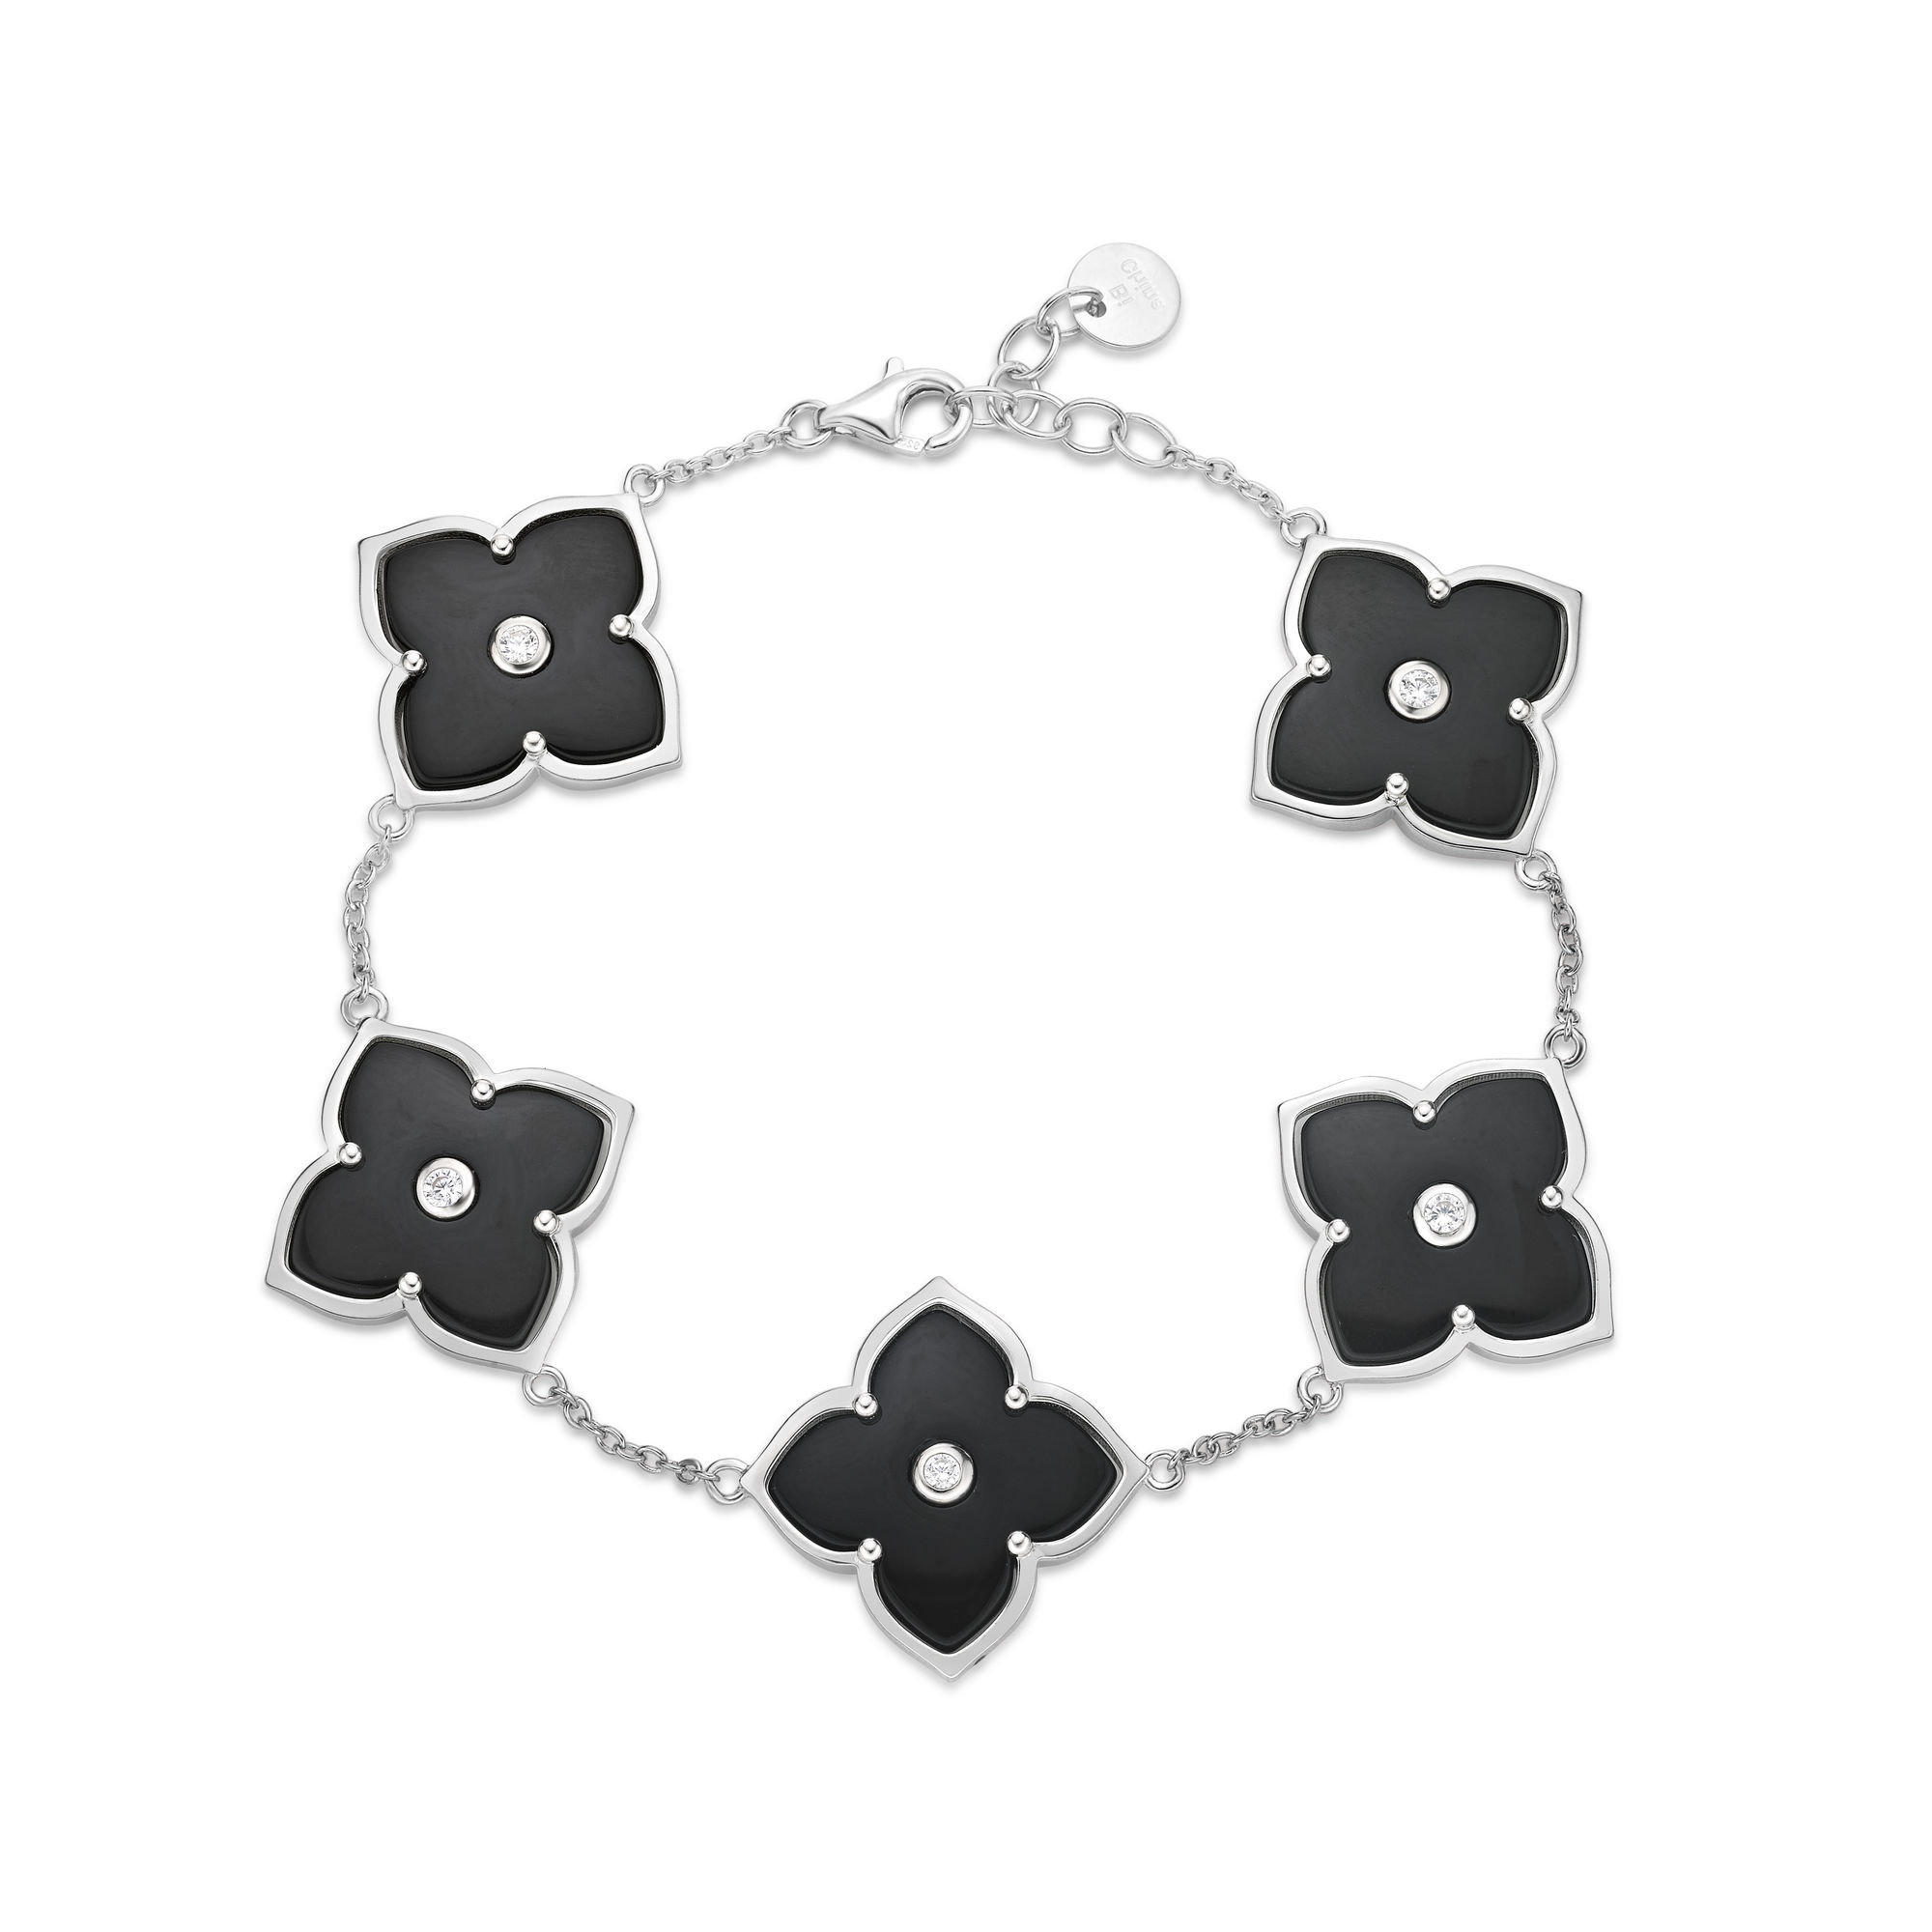 Lavari Jewelers Women's Black Onyx Five Flower Bracelet with Lobster Clasp, 925 Sterling Silver, Cubic Zirconia, 7-8 Inches